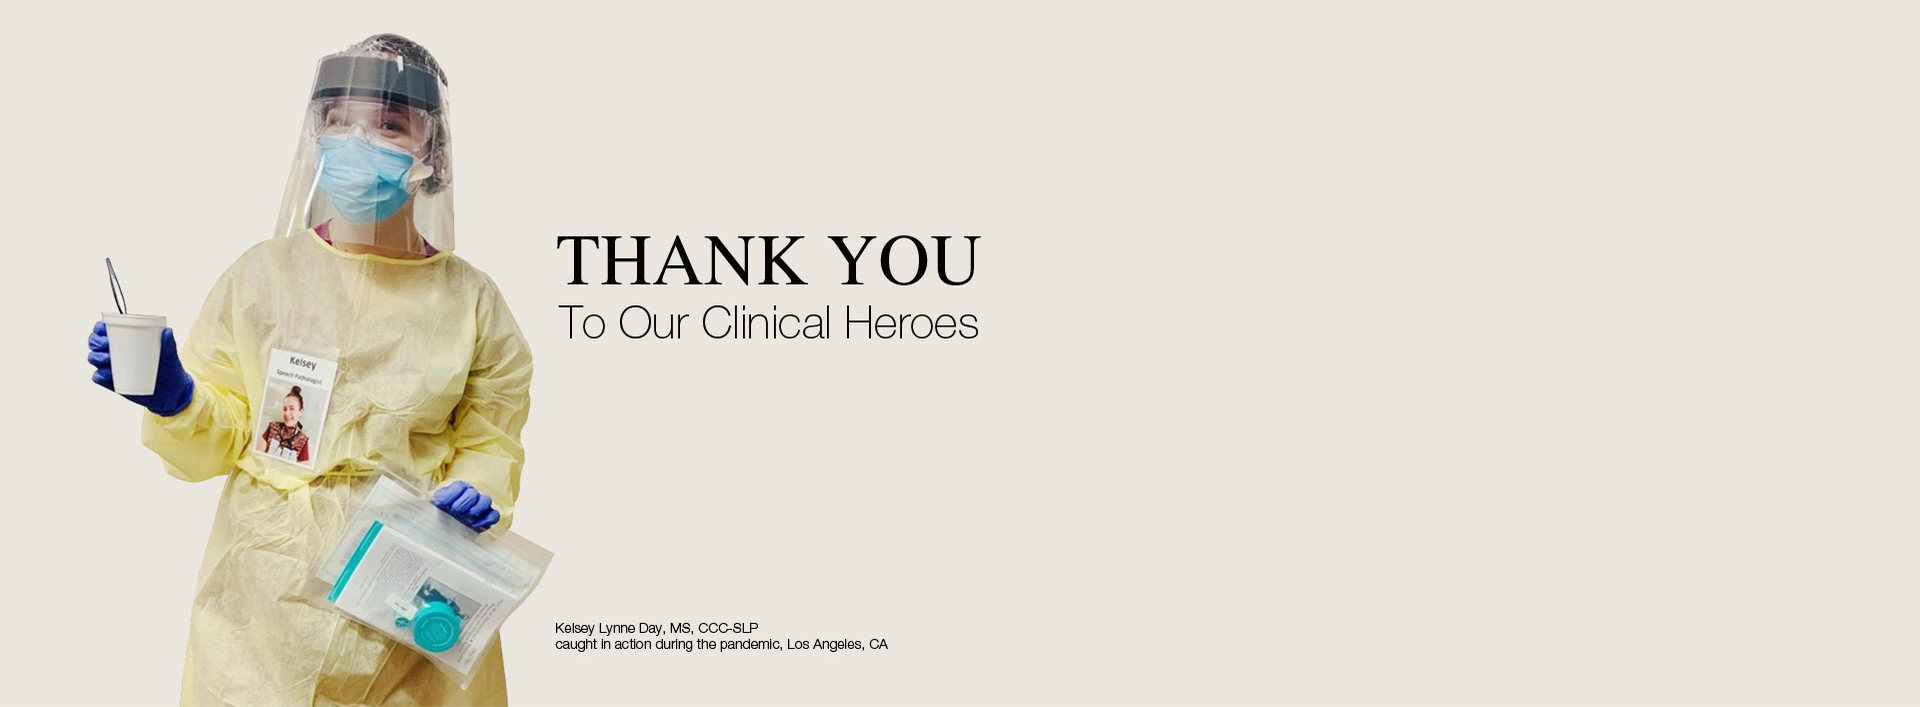 Thank You to Our Clinical Heroes